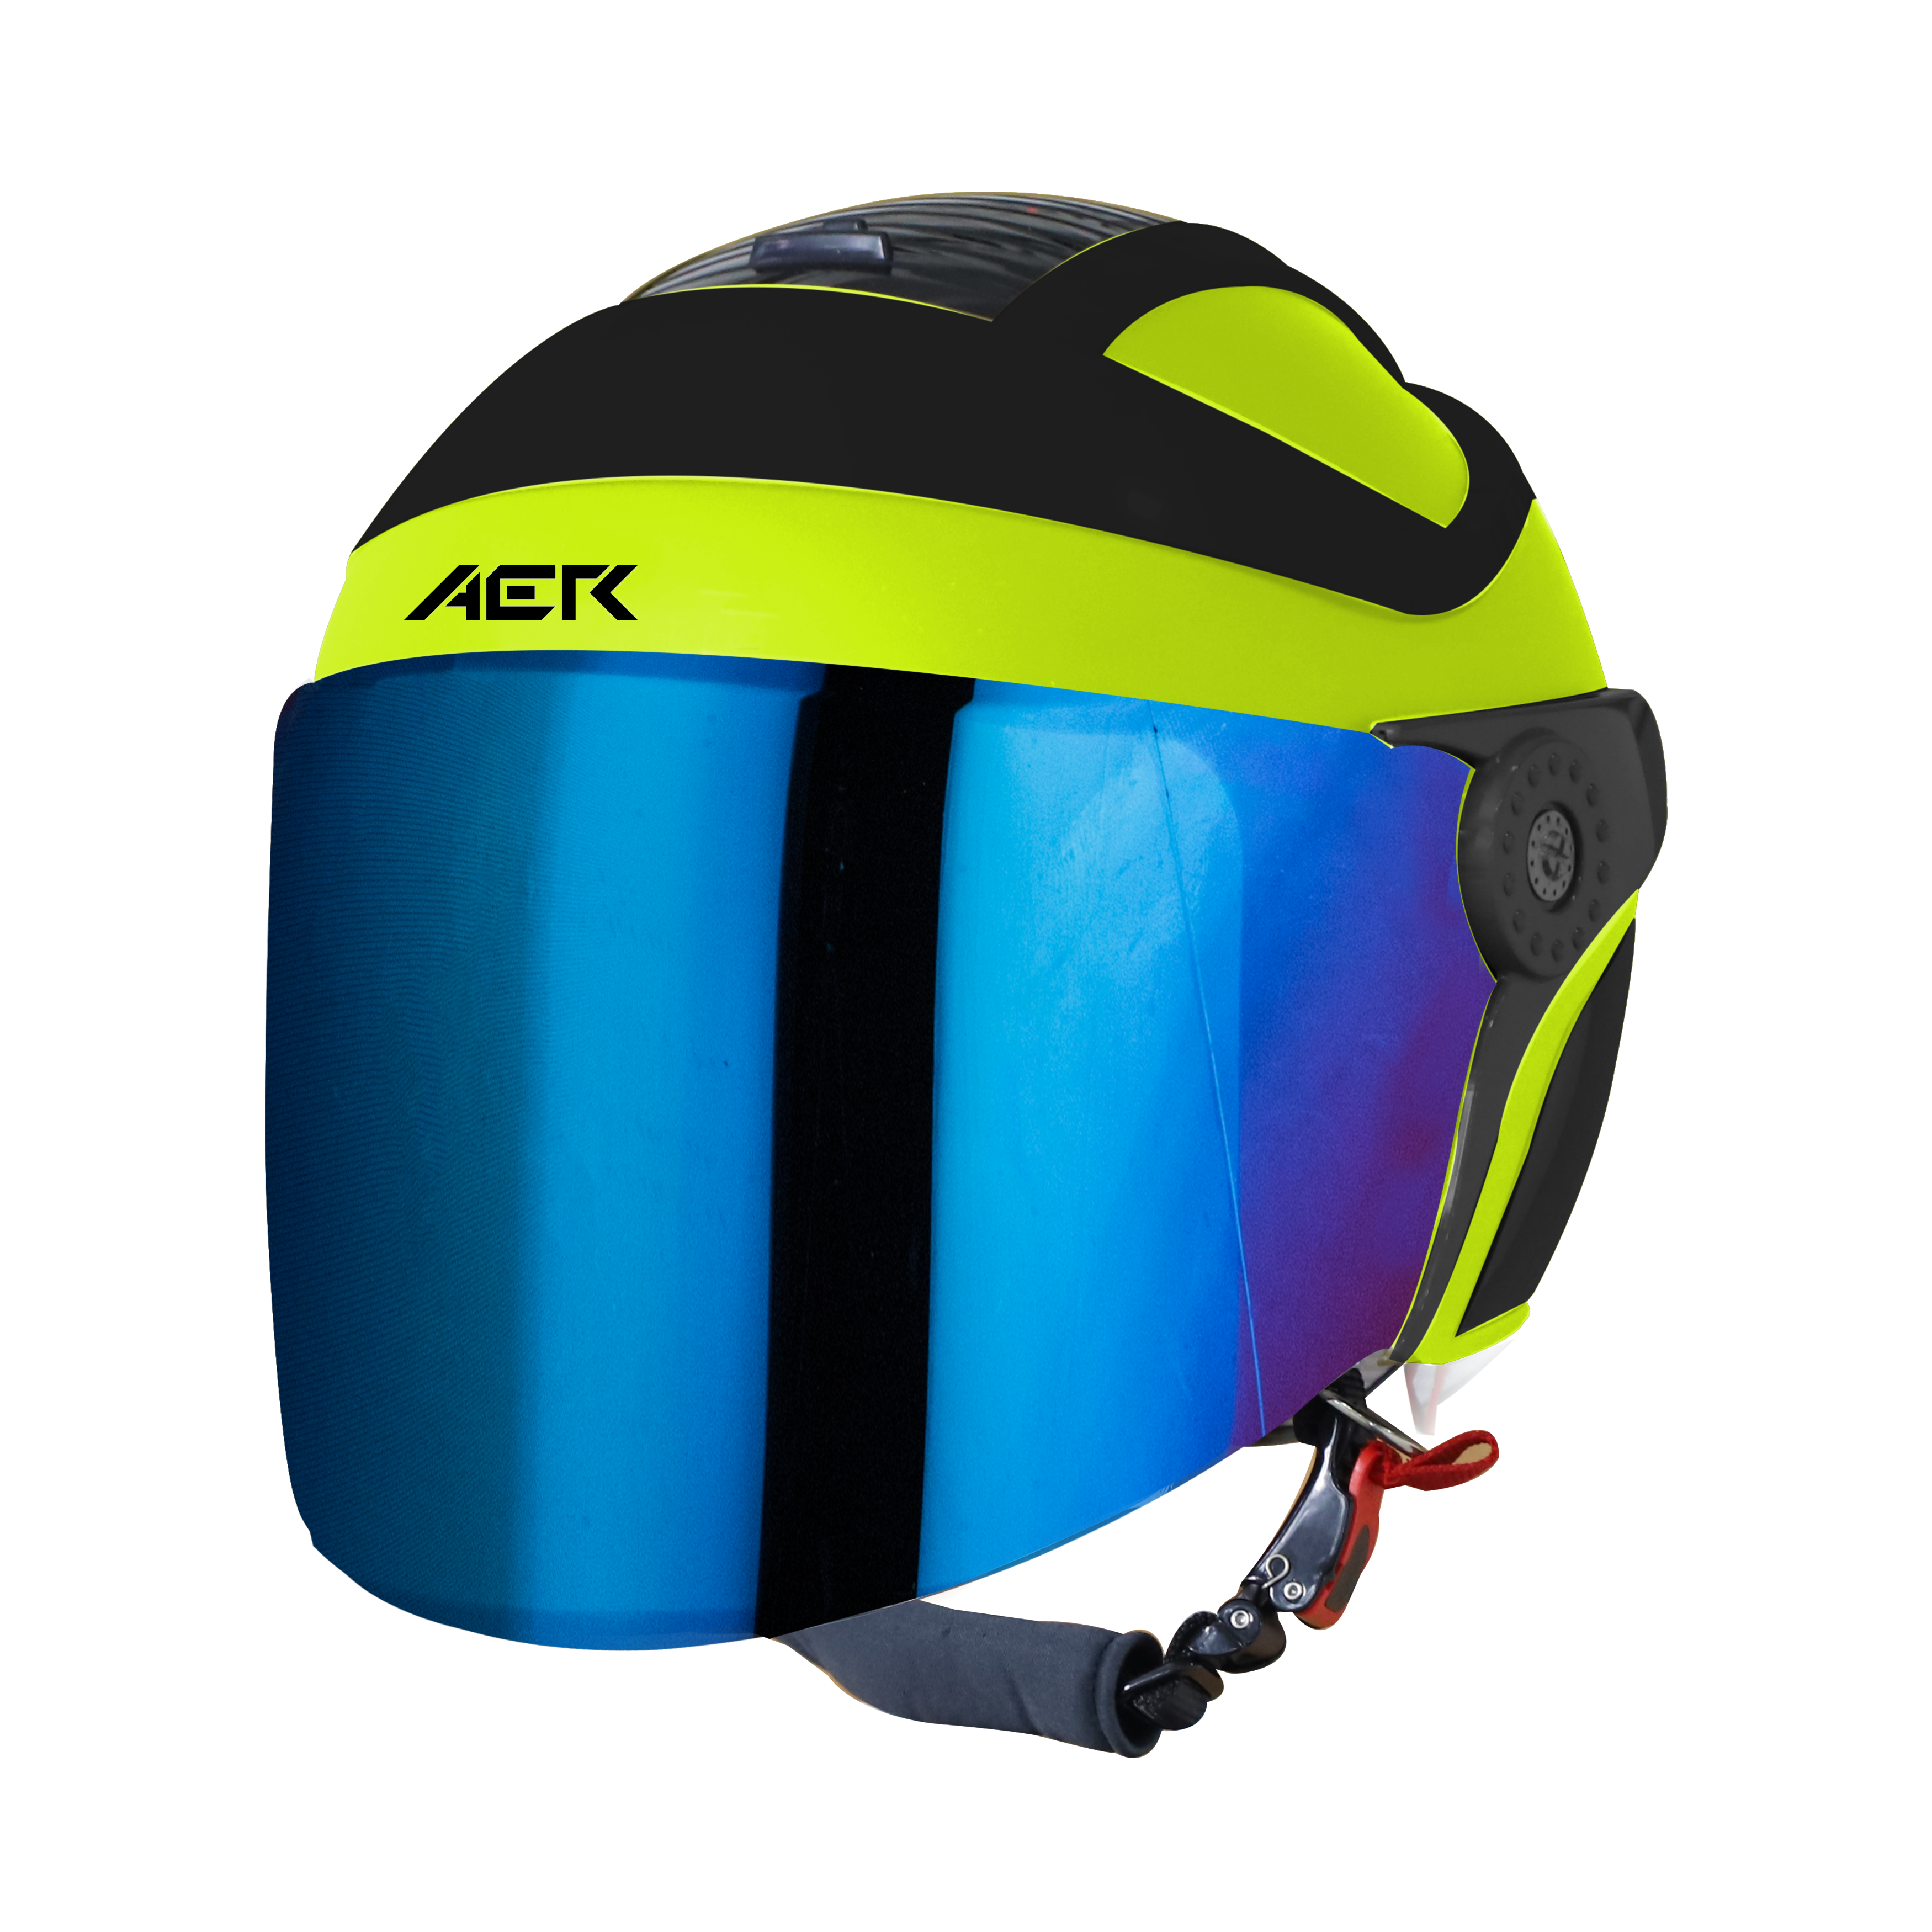 SB-29 AER GLOSSY FLUO NEON WITH BLACK ( FITTED WITH CLEAR VISOR WITH EXTRA BLUE CHROME VISOR FREE)